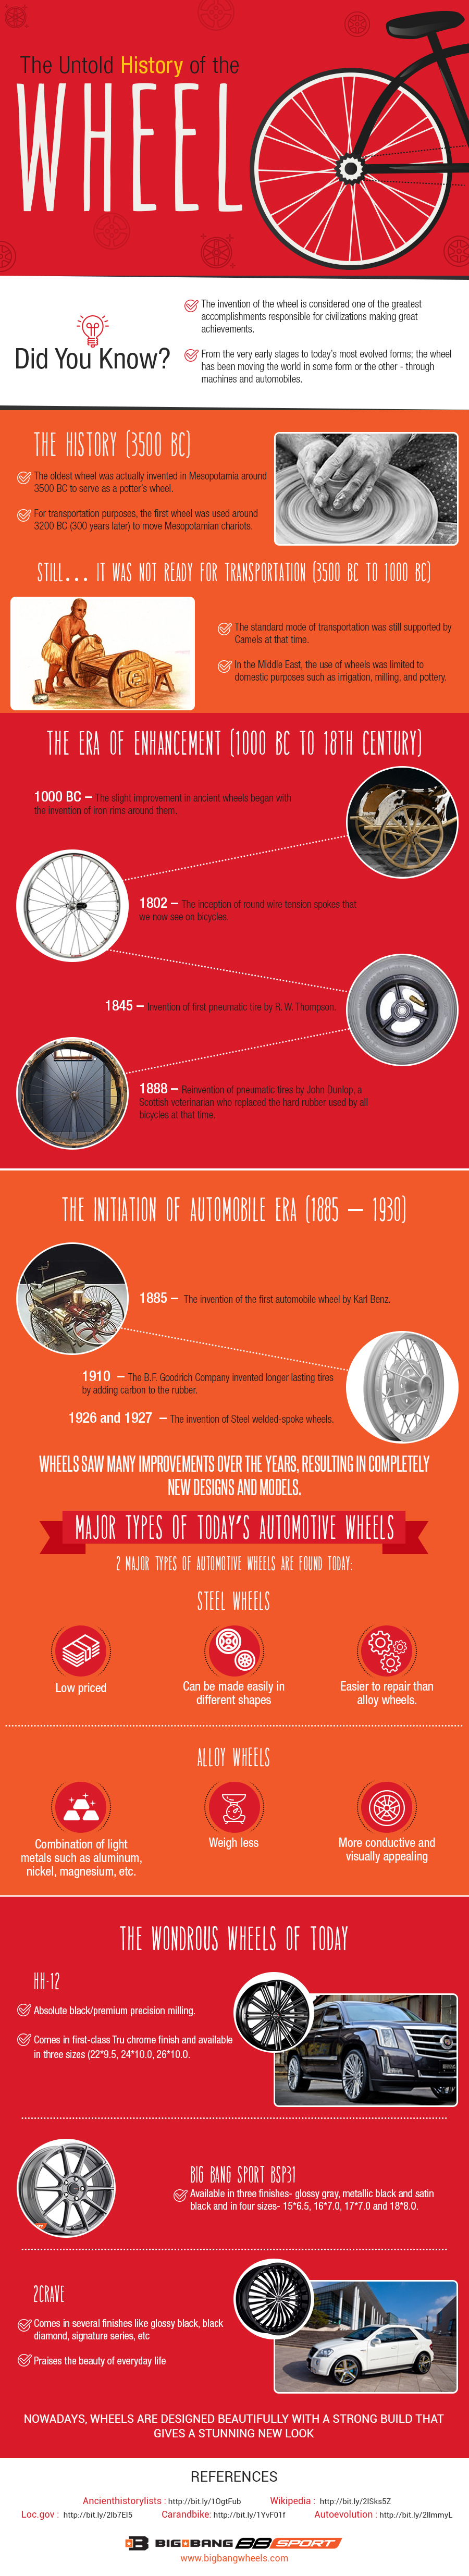 history of the wheel infographic